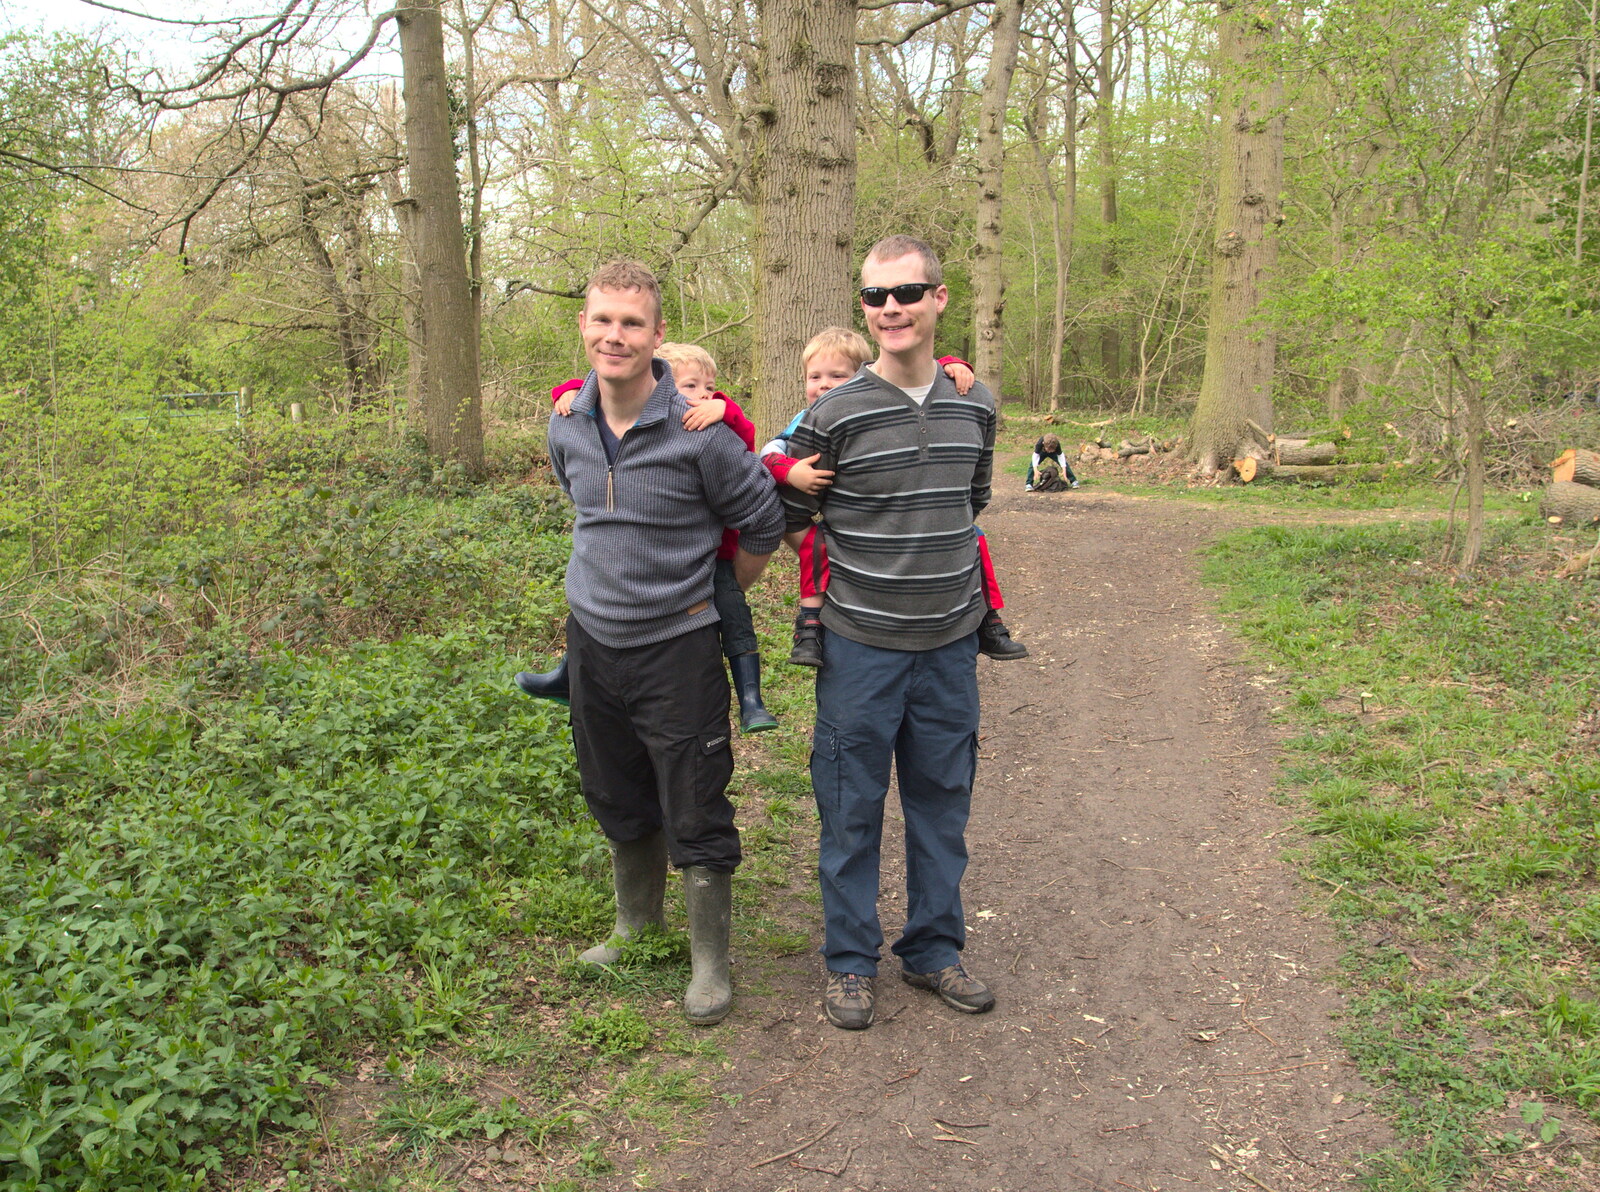 Mikey and Andy from Making Dens: Rosie's Birthday, Thornham, Suffolk - 25th April 2015